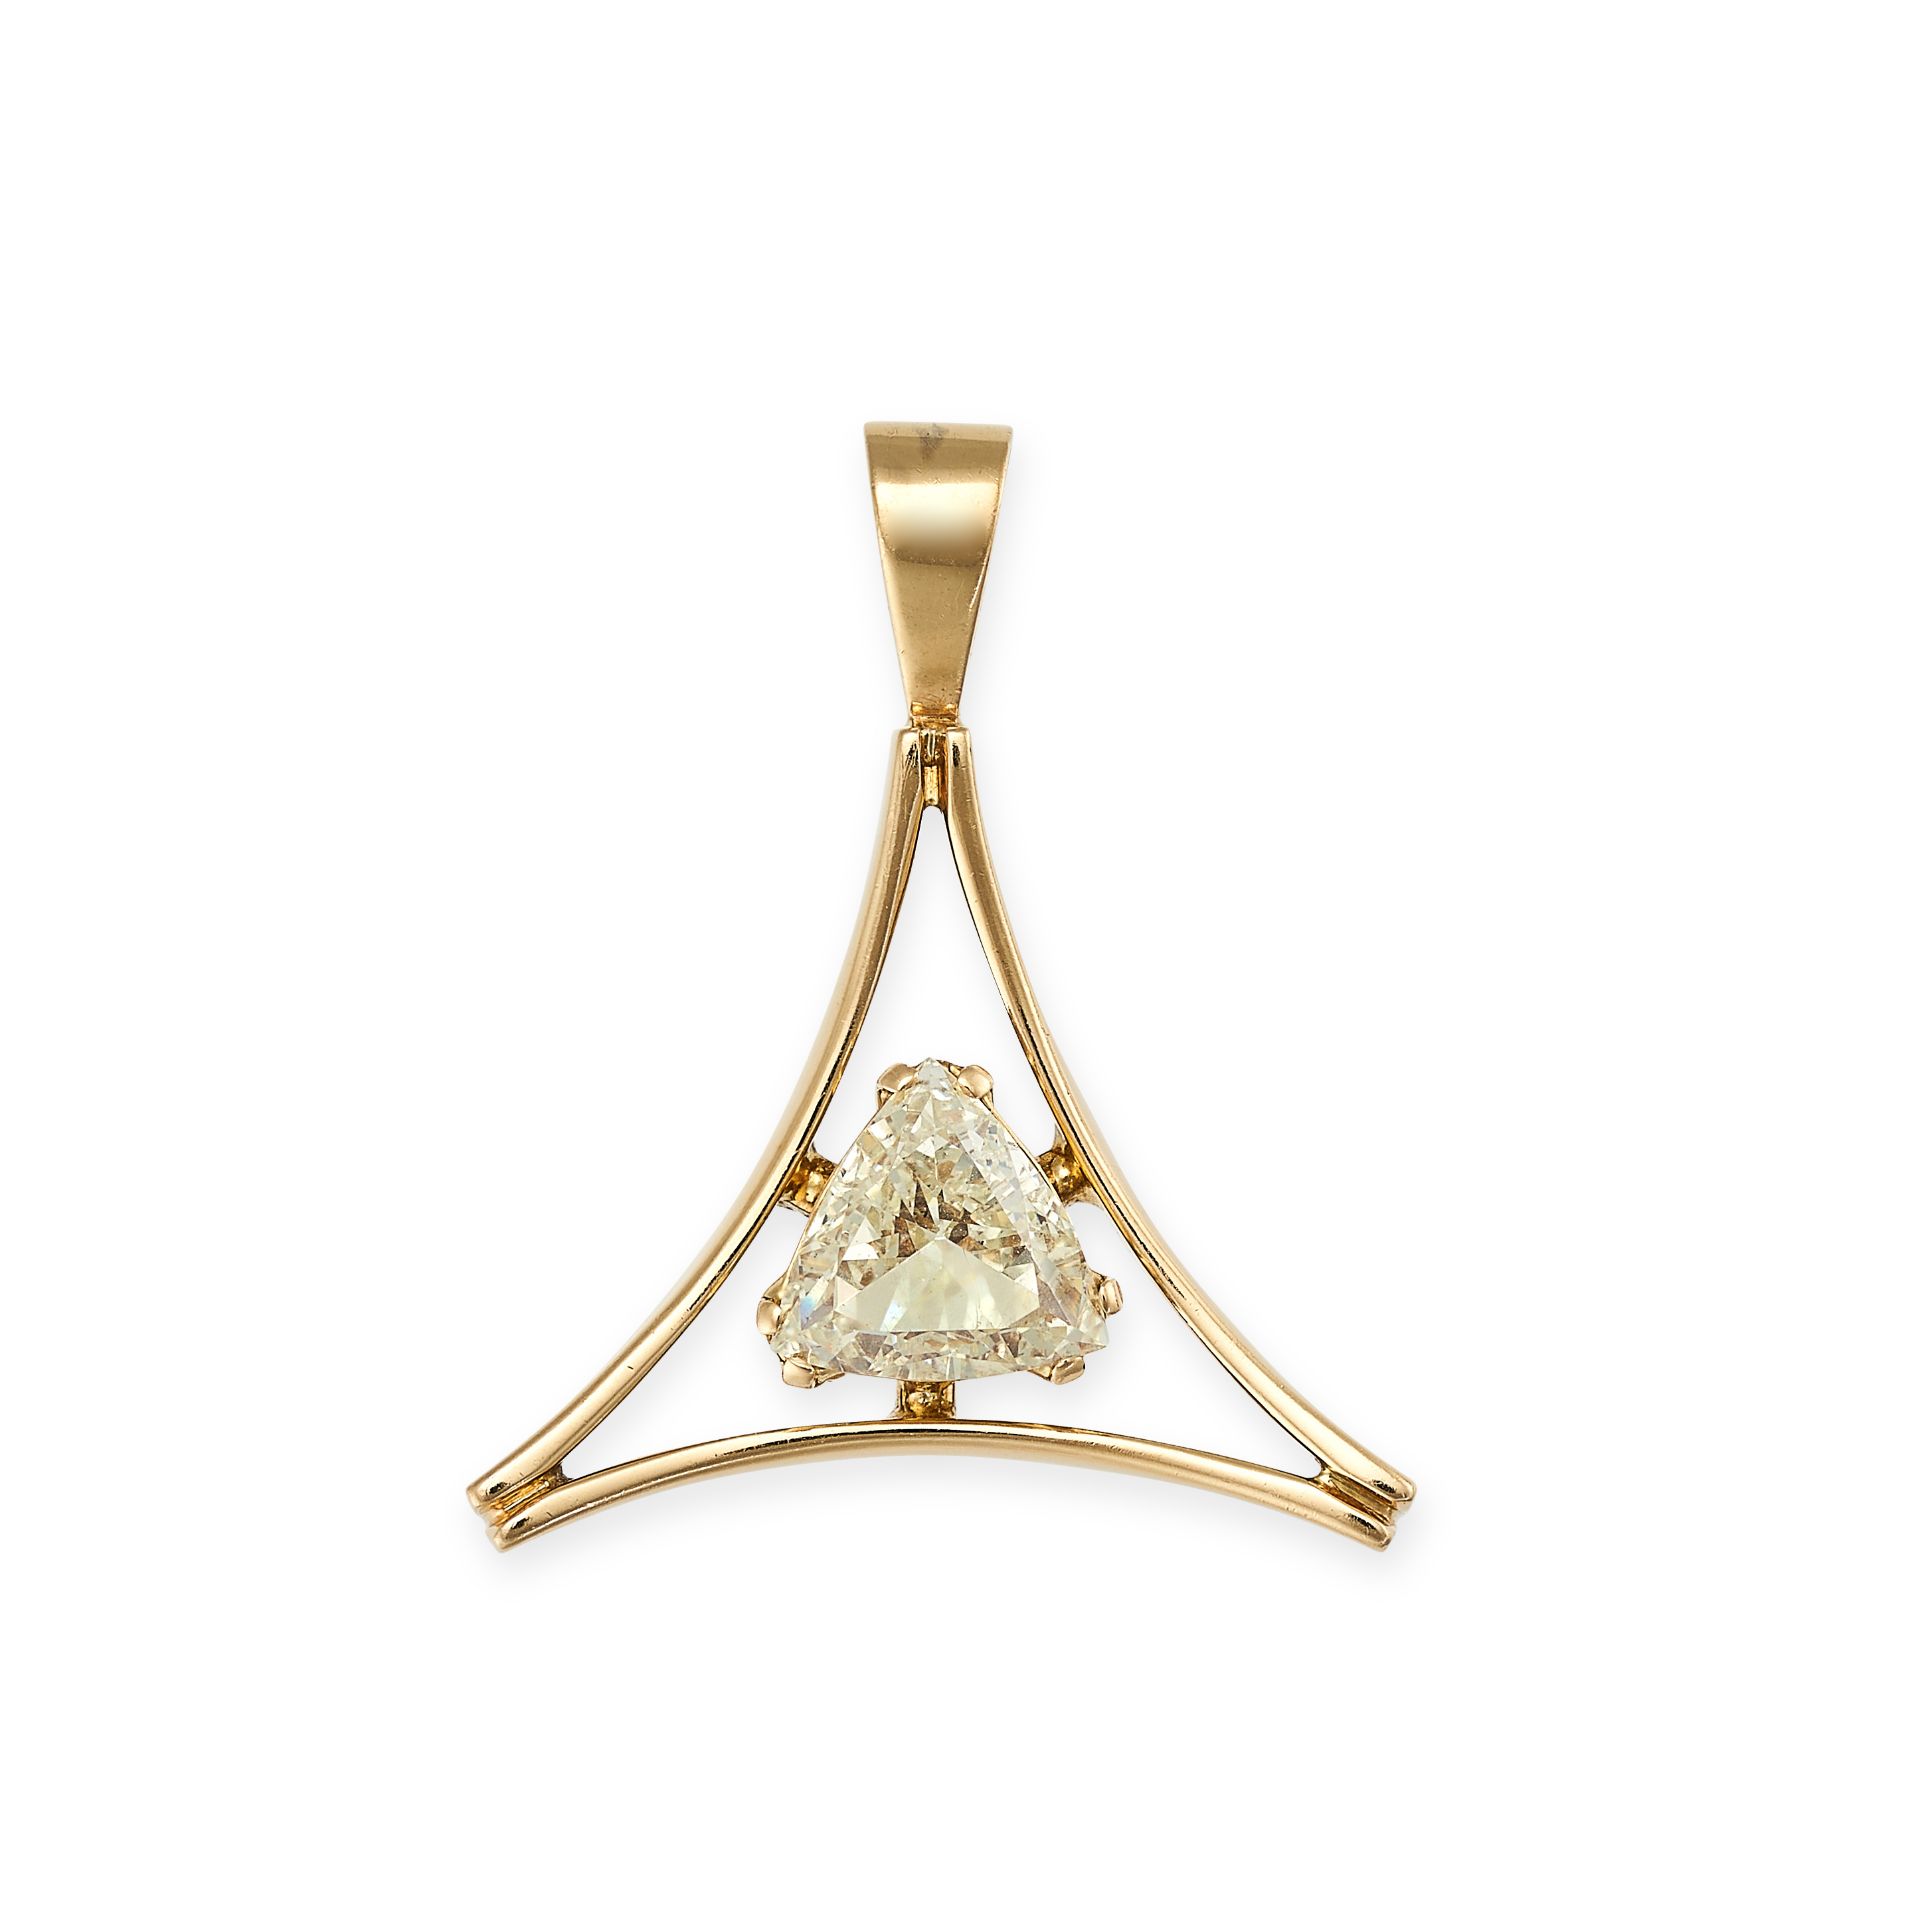 NO RESERVE - A DIAMOND PENDANT in yellow gold, set with a trillion cut diamond of approximately 0...